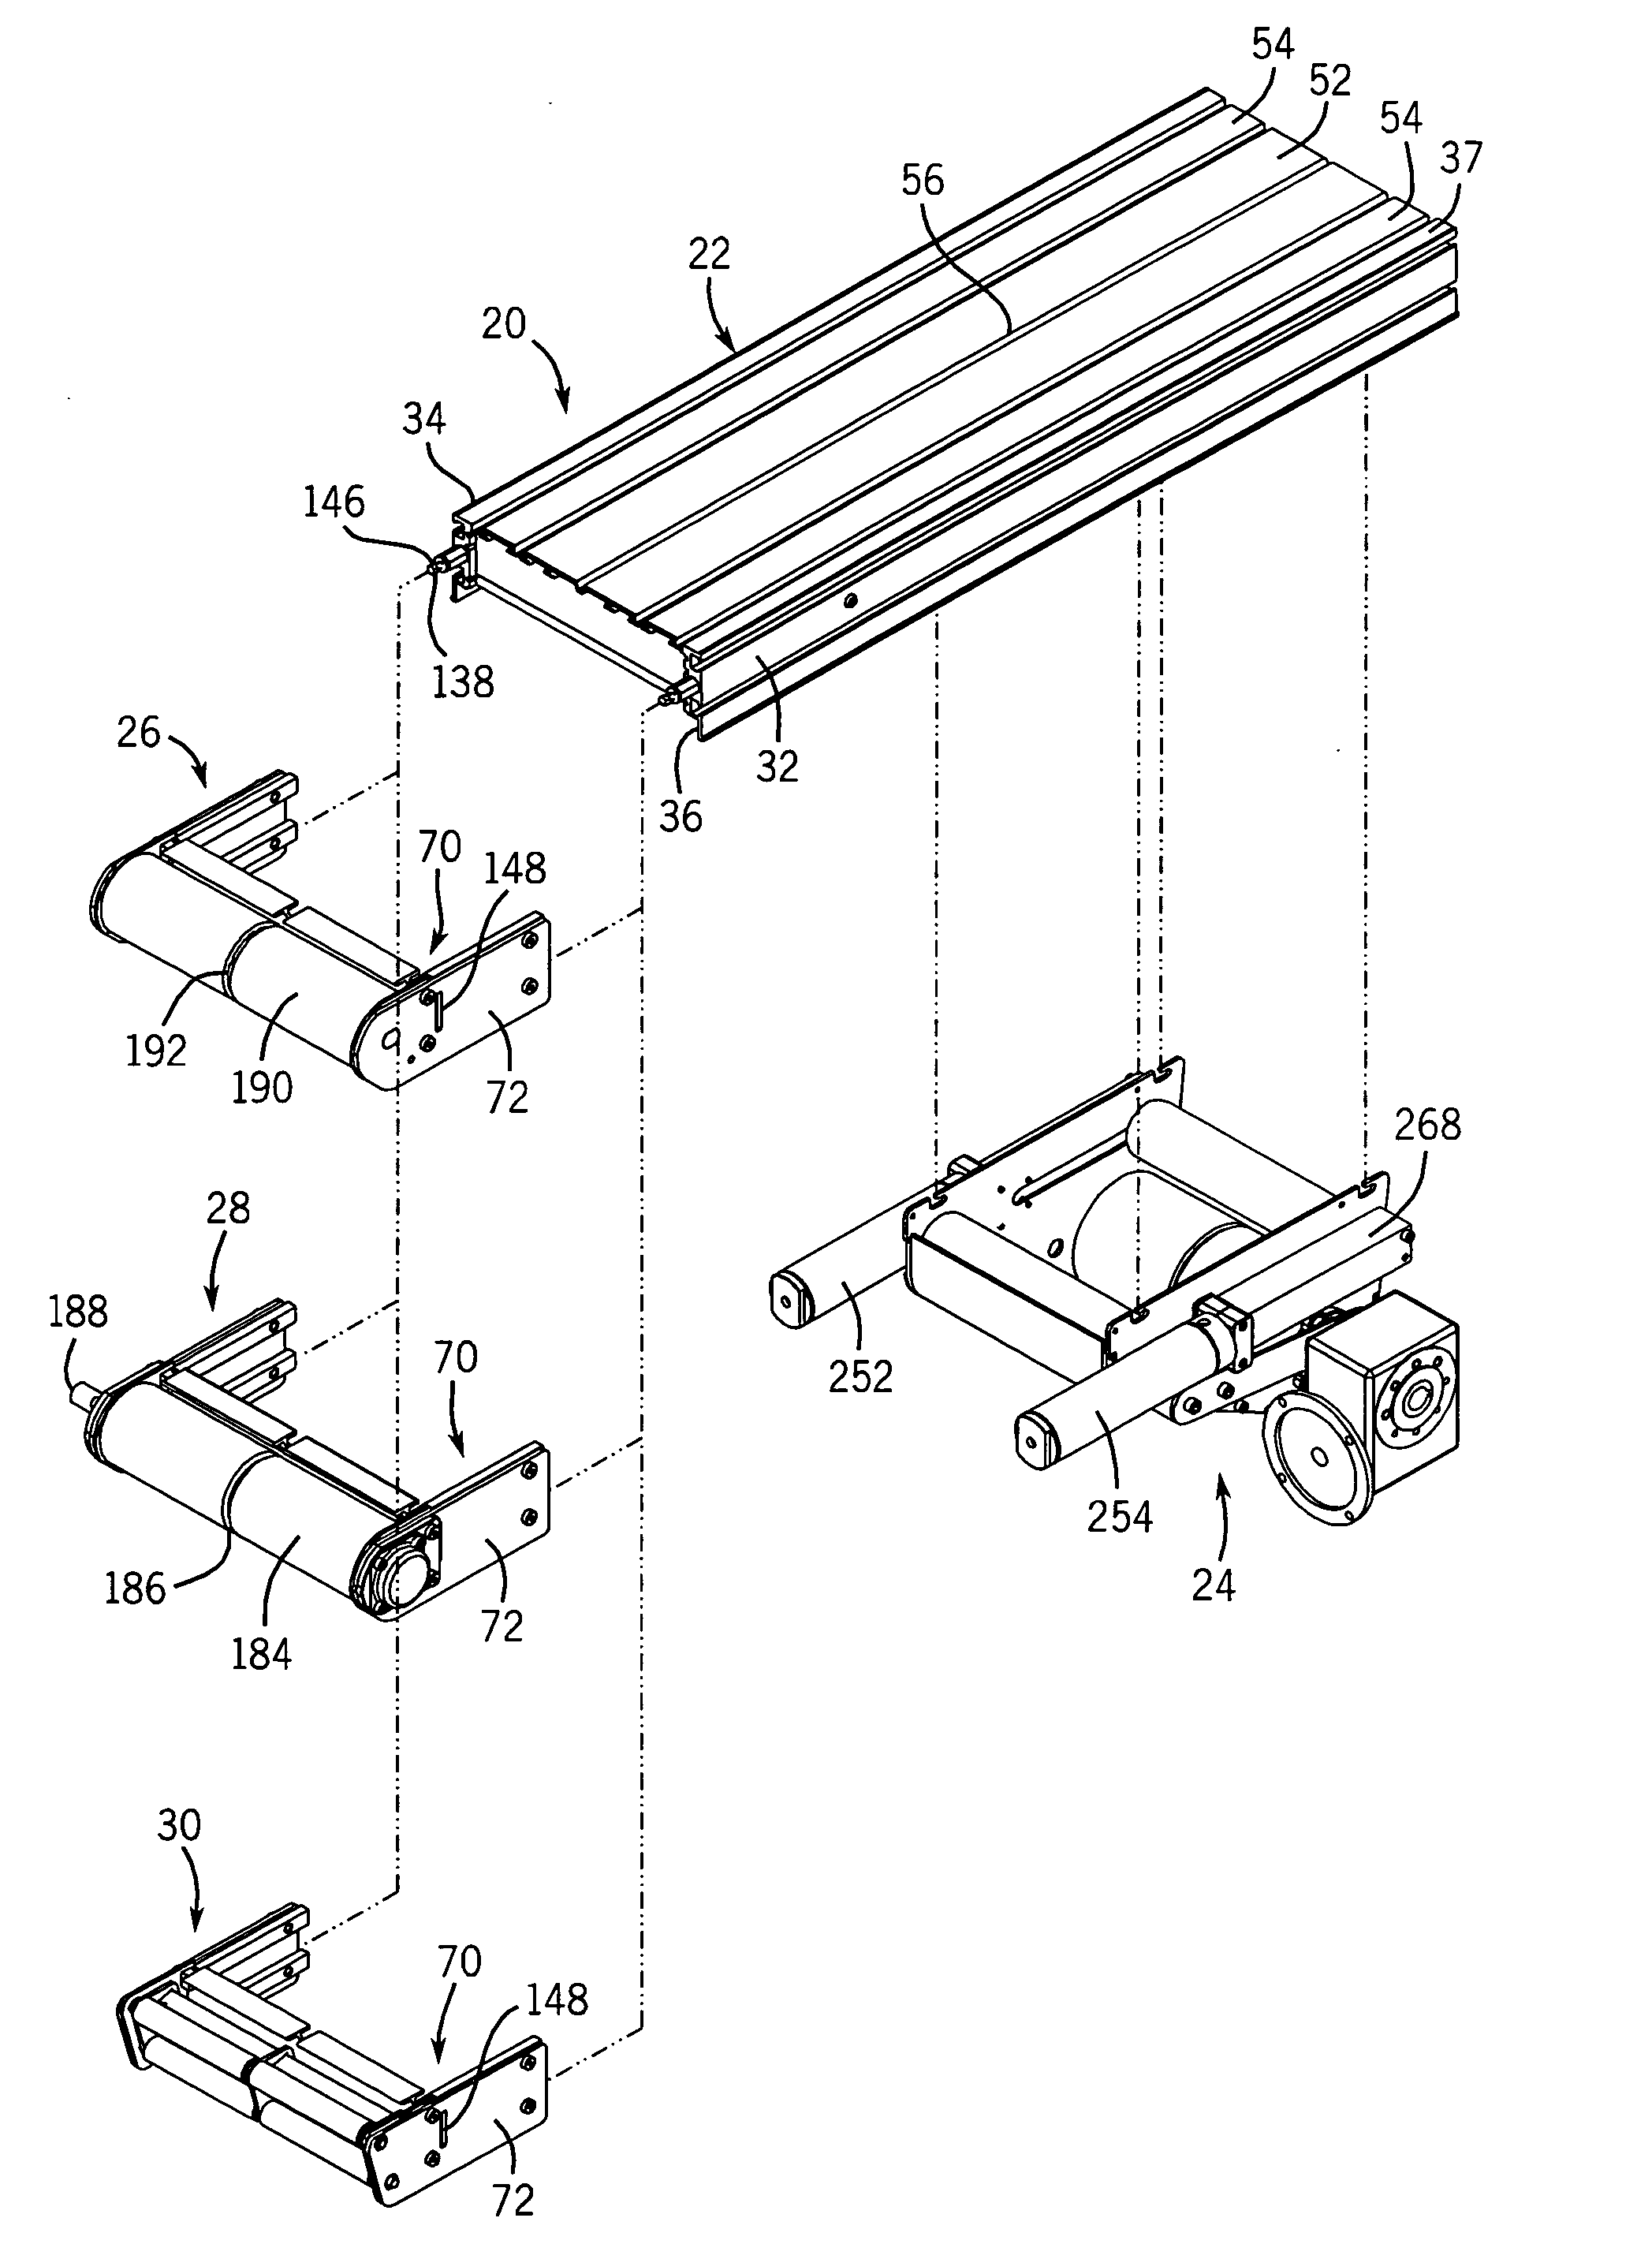 Endless belt conveyor frame and tensioning device including center drive construction